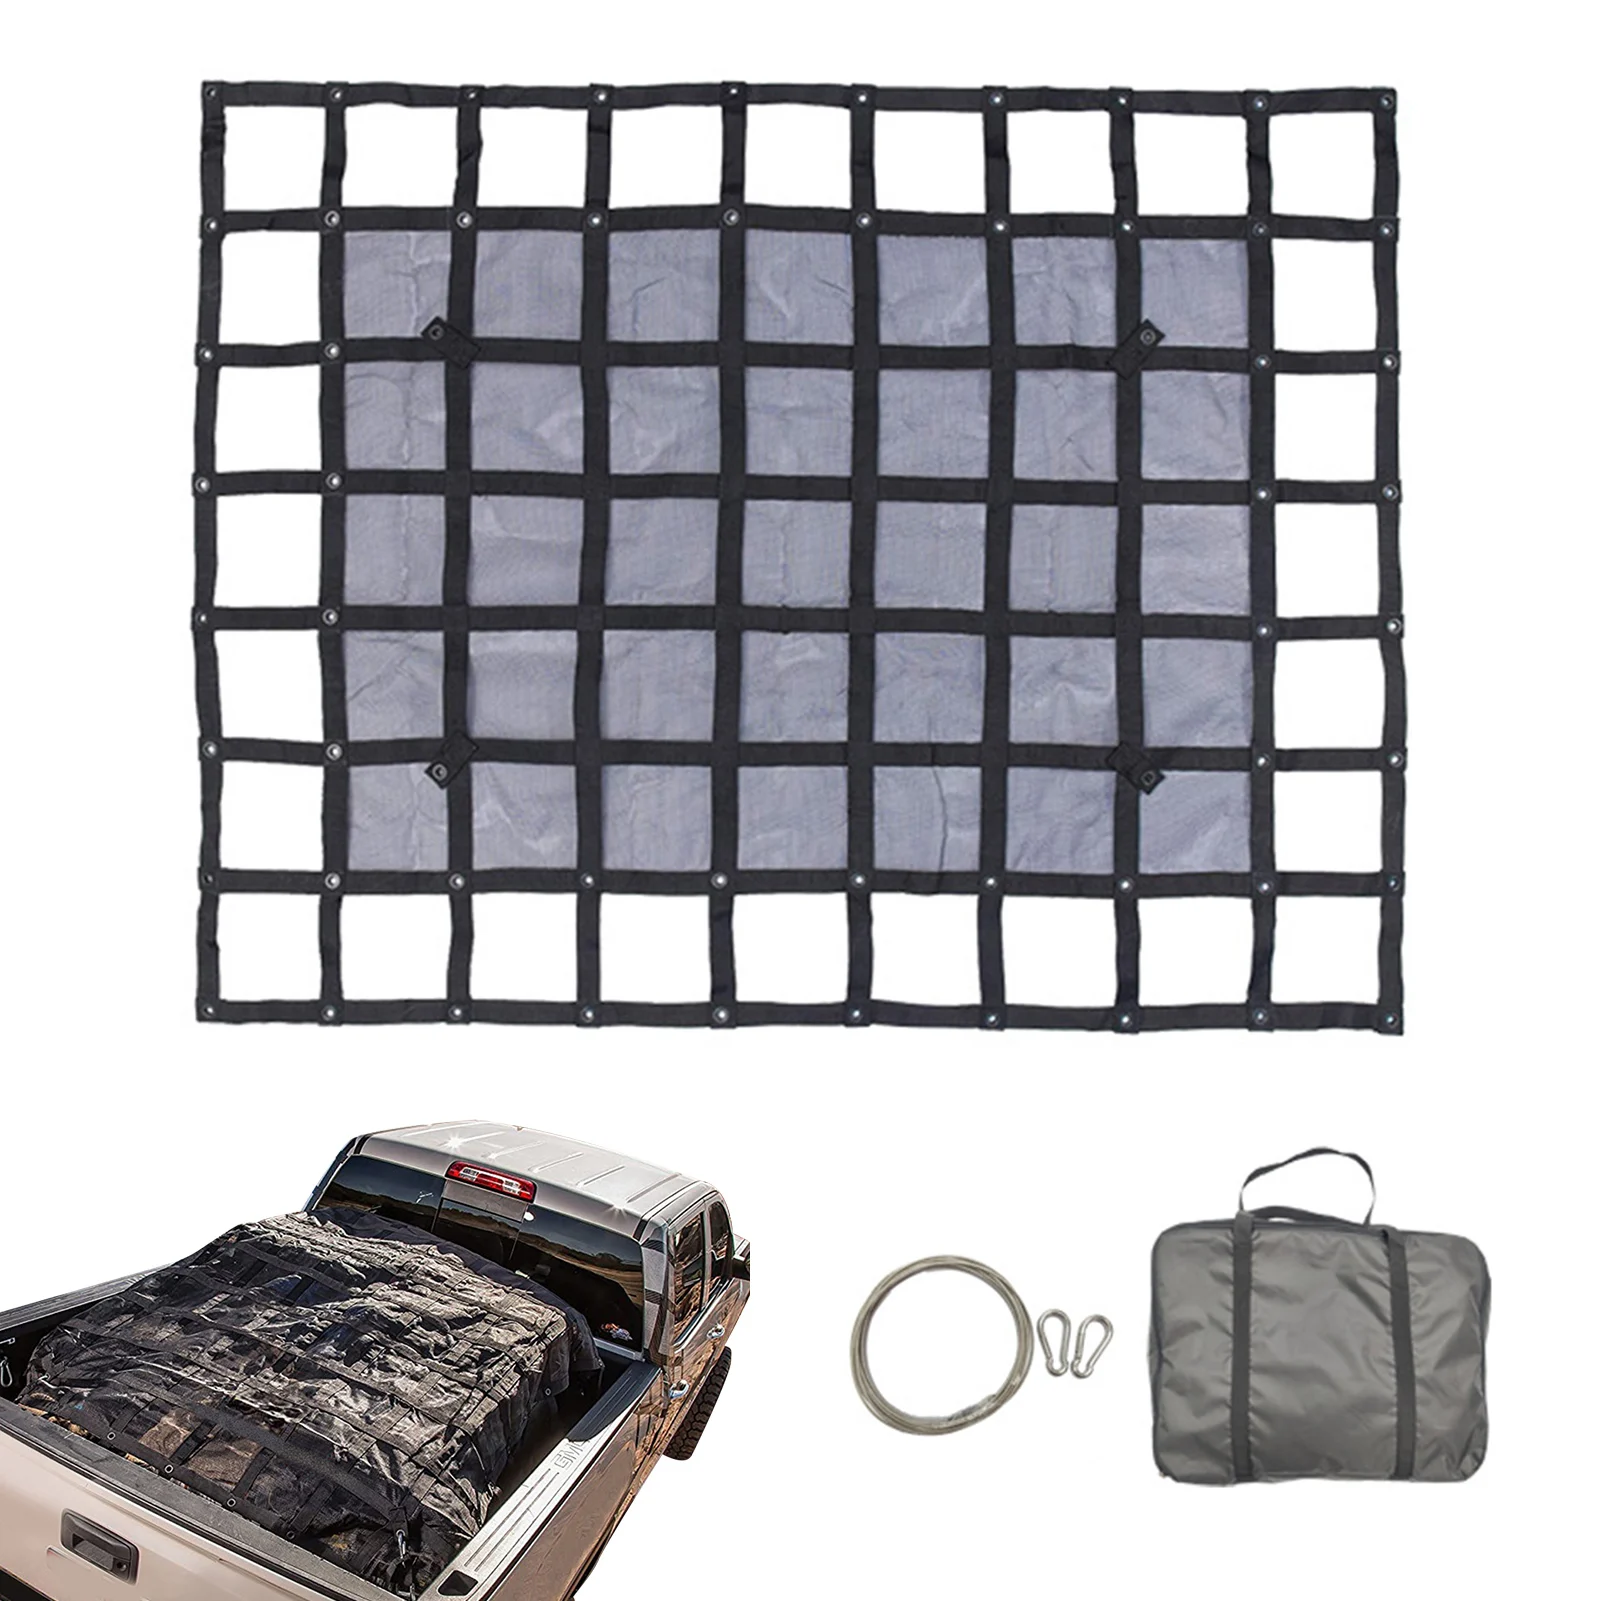 

S/M/L Heavy Duty Truck Bed Net Car Accessories With Carabiners Hooks Storage Bag Bungee Netting Cargo Nets For Pickup Trucks